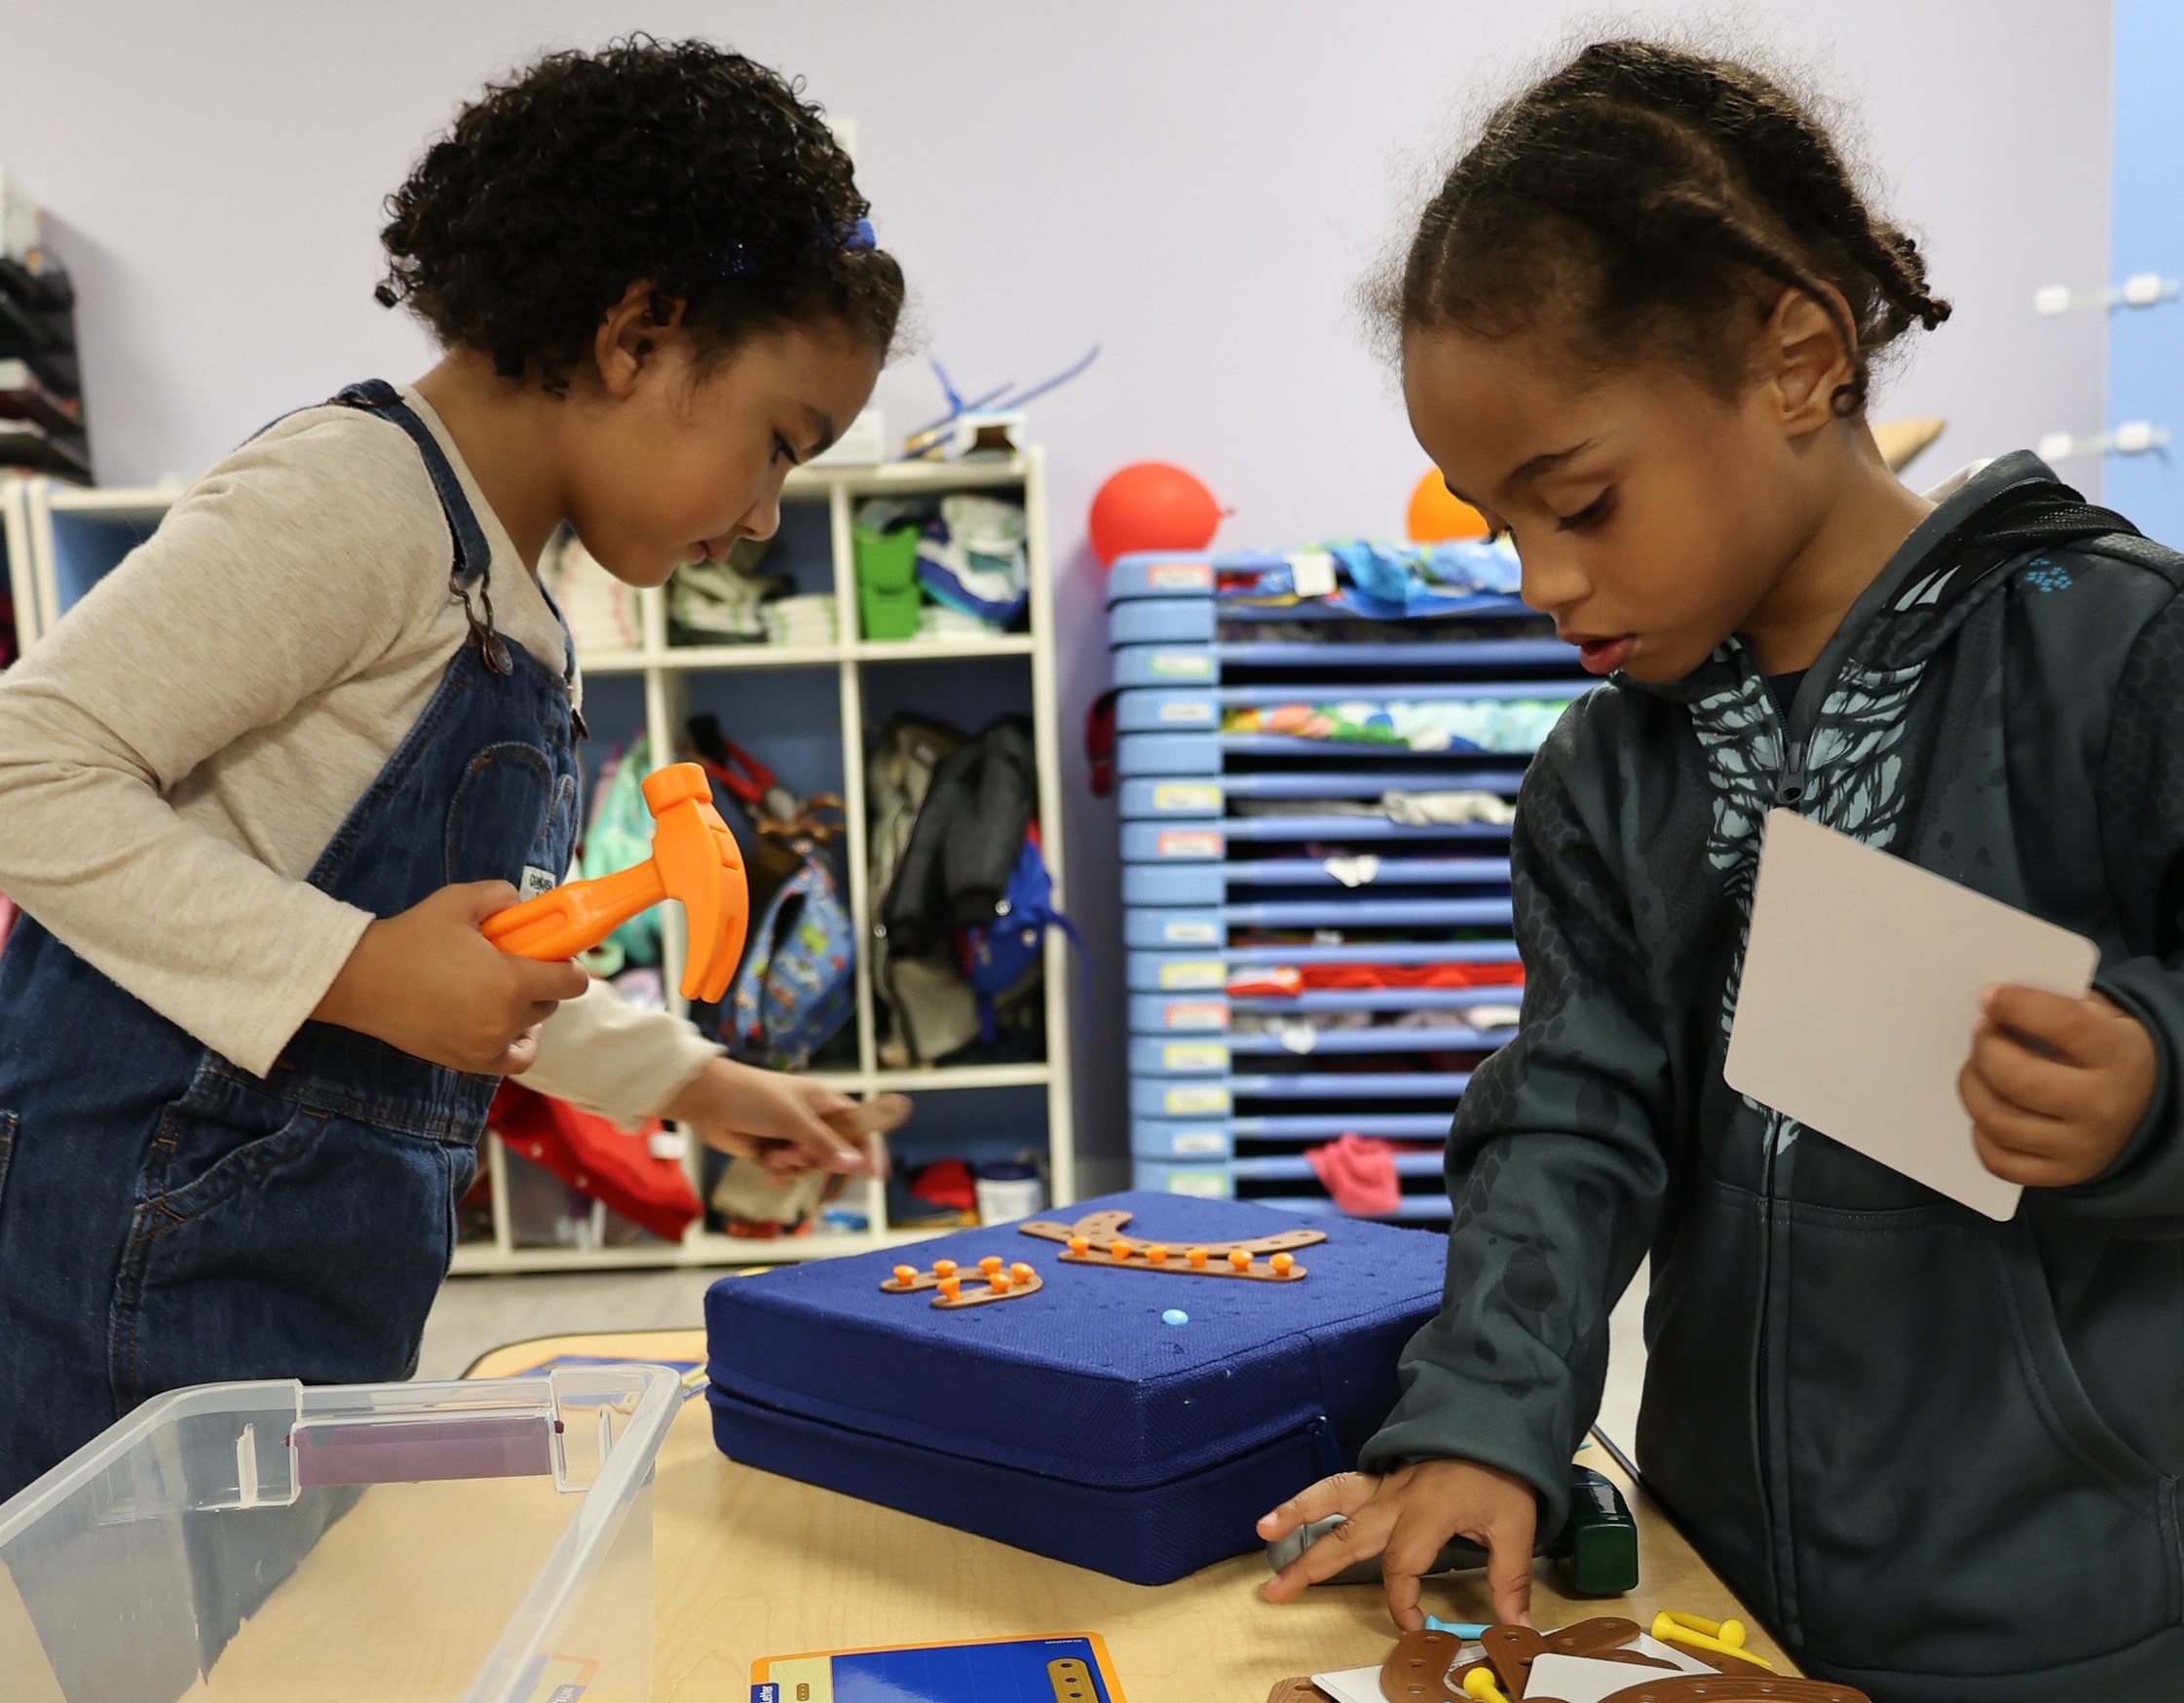 Two children sorting and organizing toys as part of a fun spring cleaning activity in a playroom